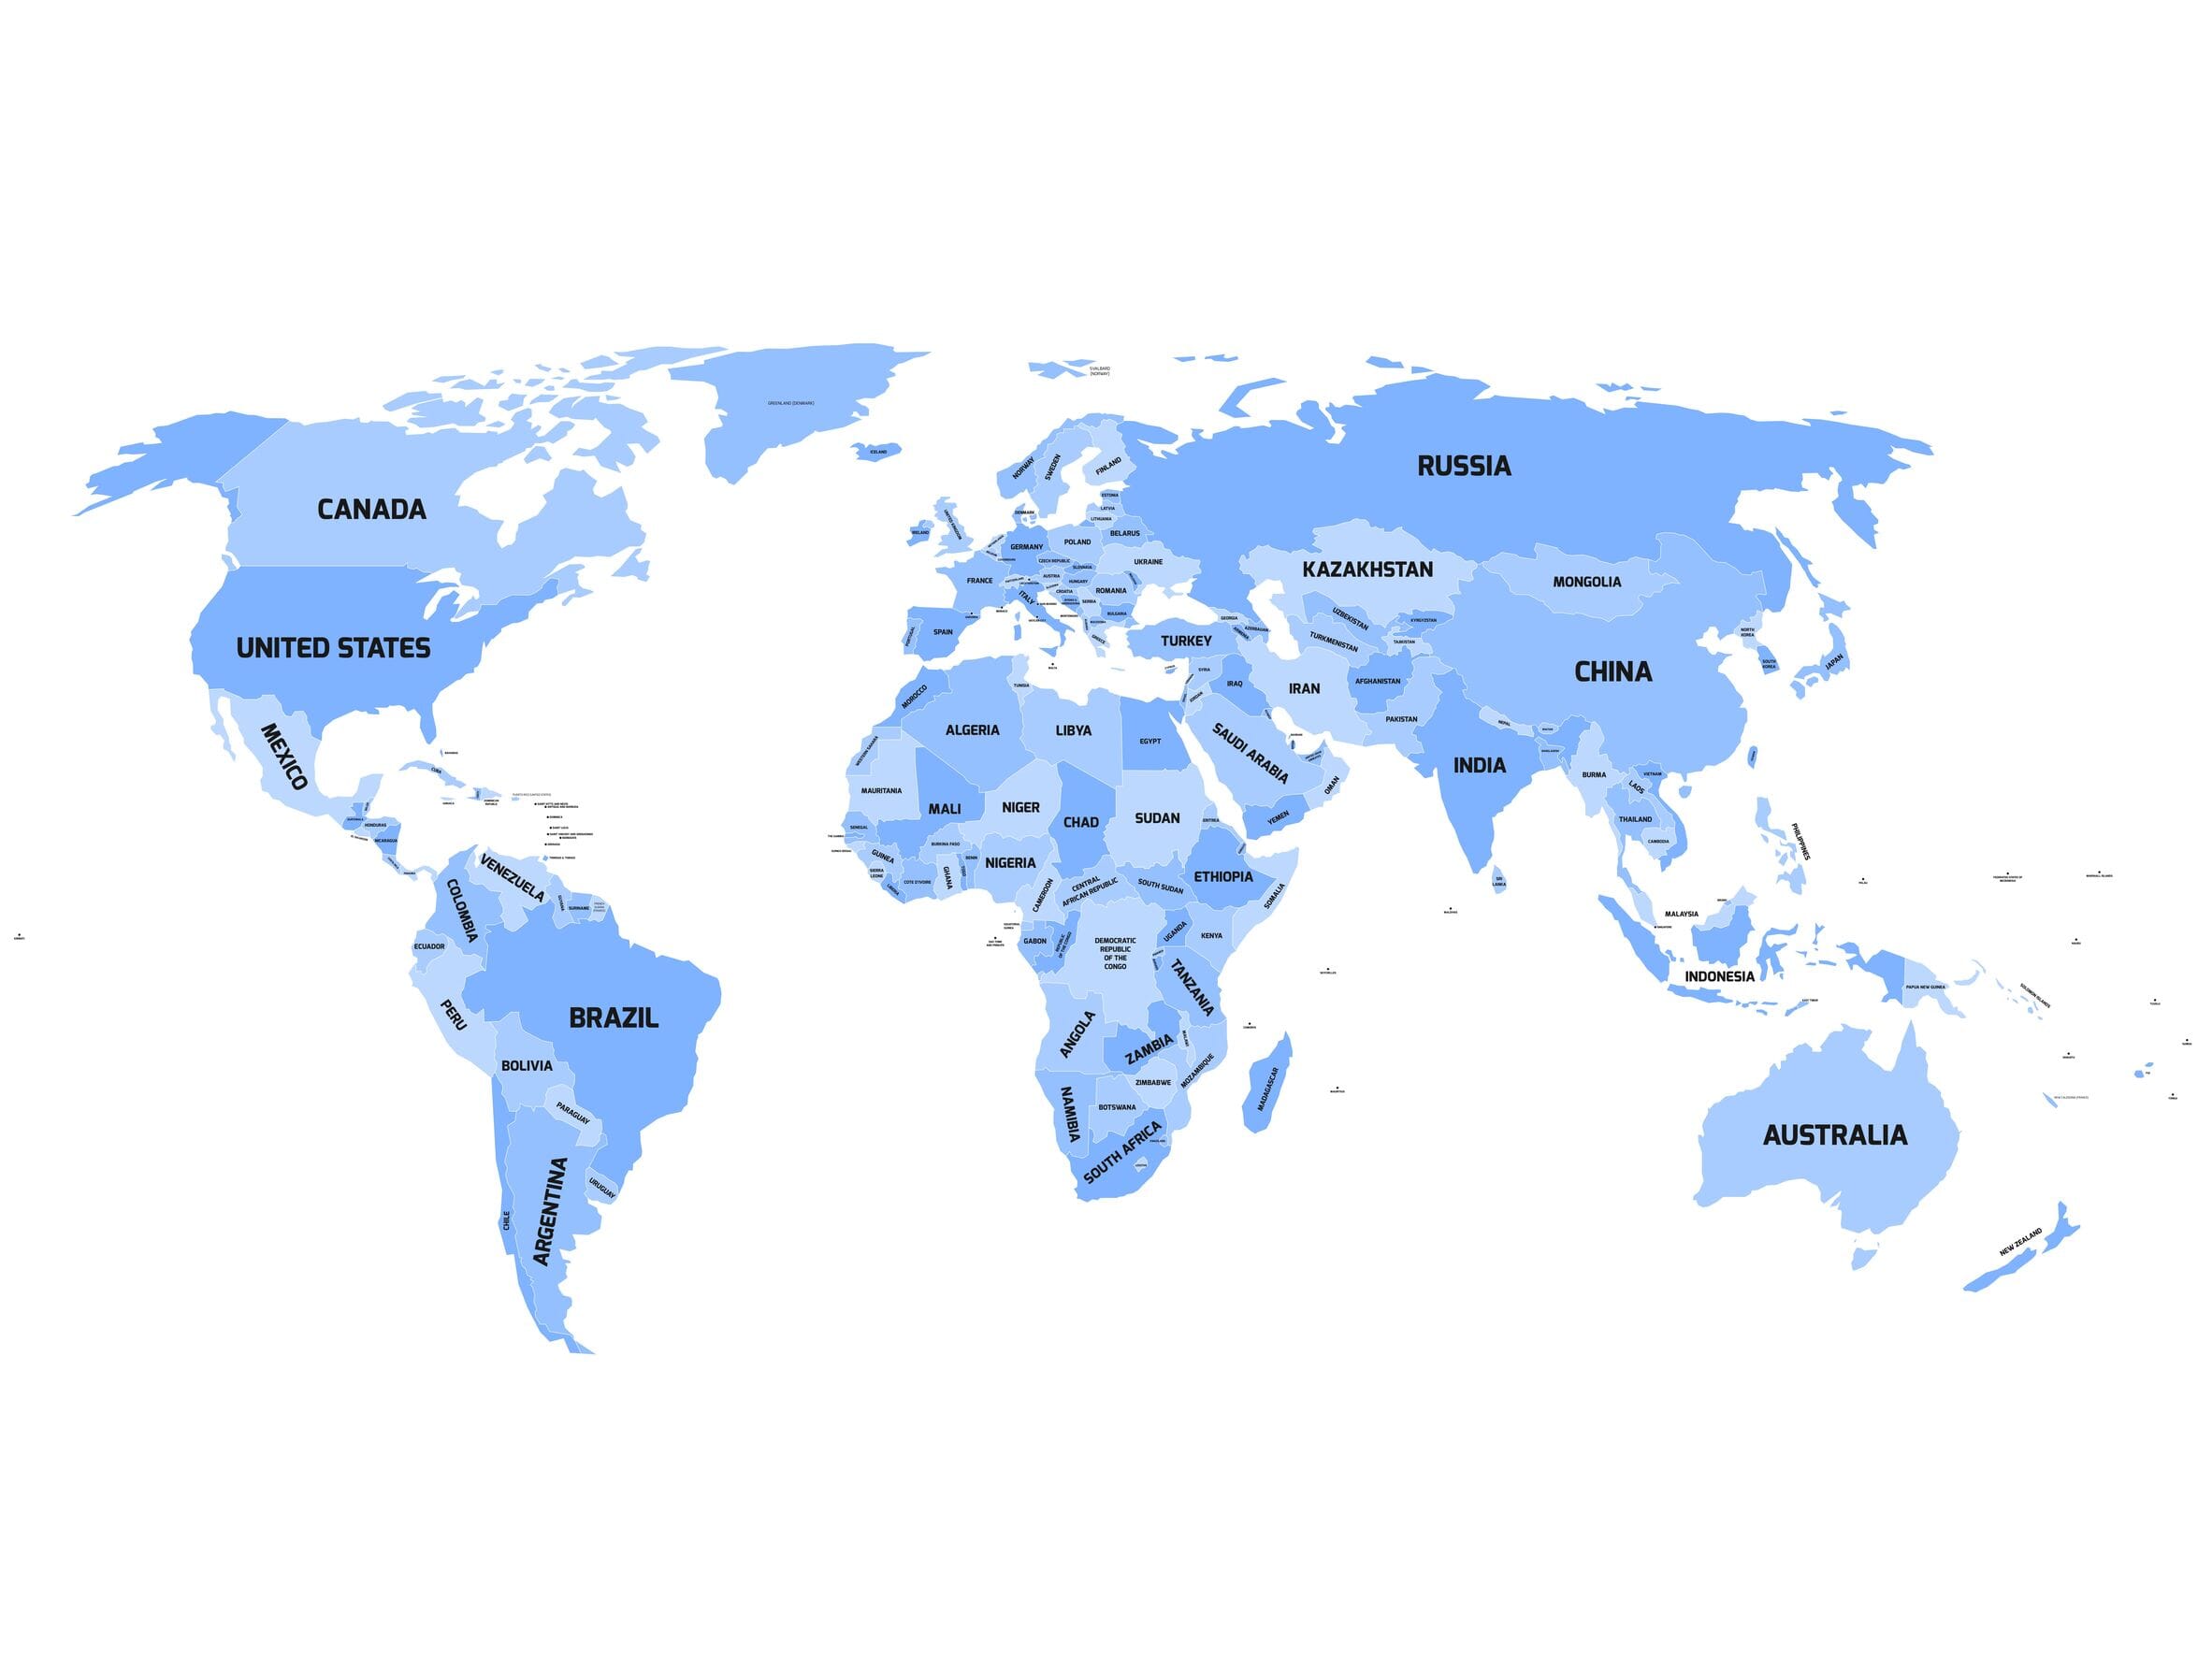 The outreach of Gaskell Law is international: the company has clients from all over the globe